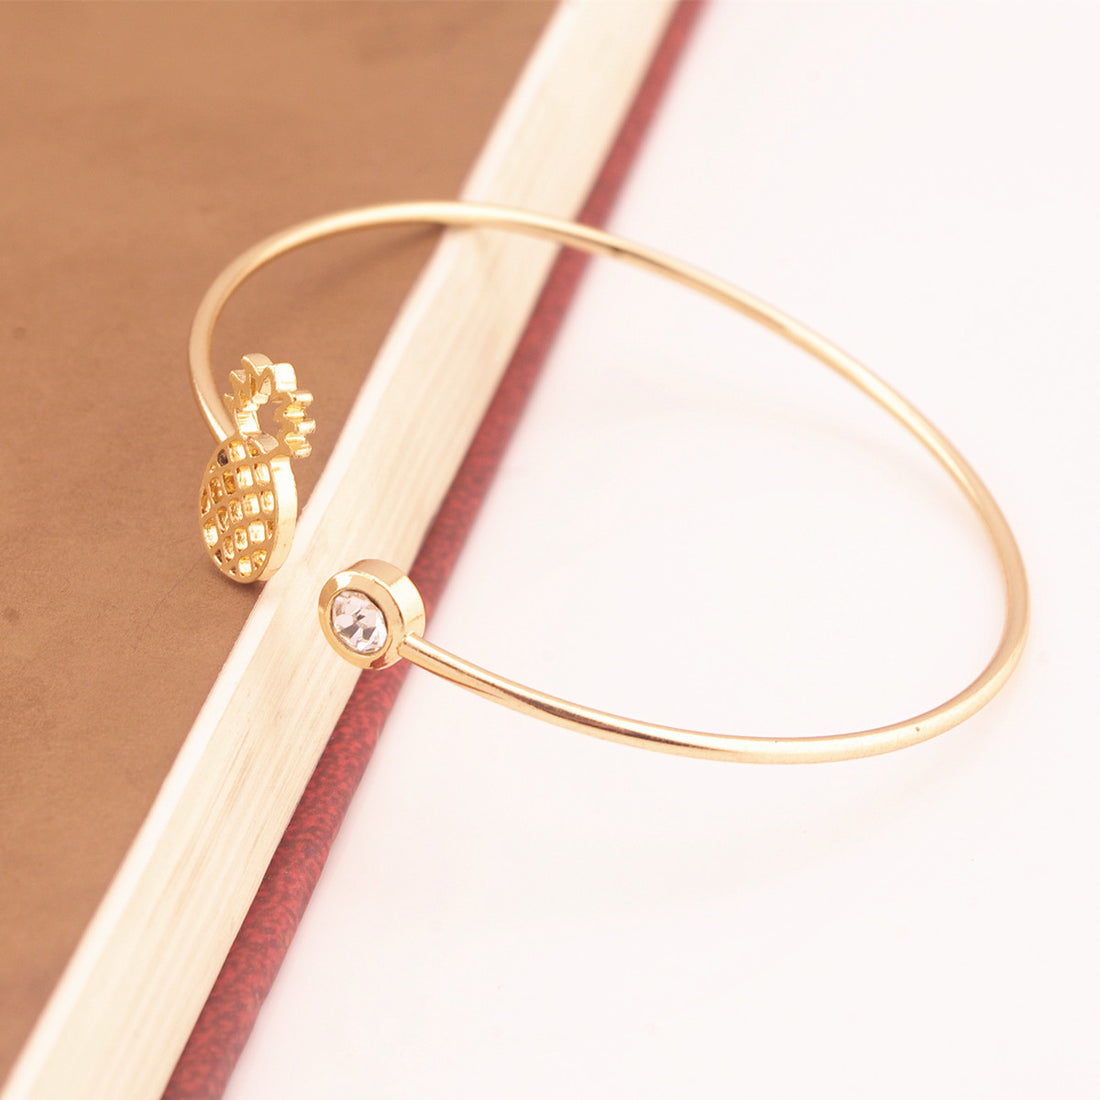 Sweet Pineapple Bracelet Ring - Oh Yours Fashion - 1